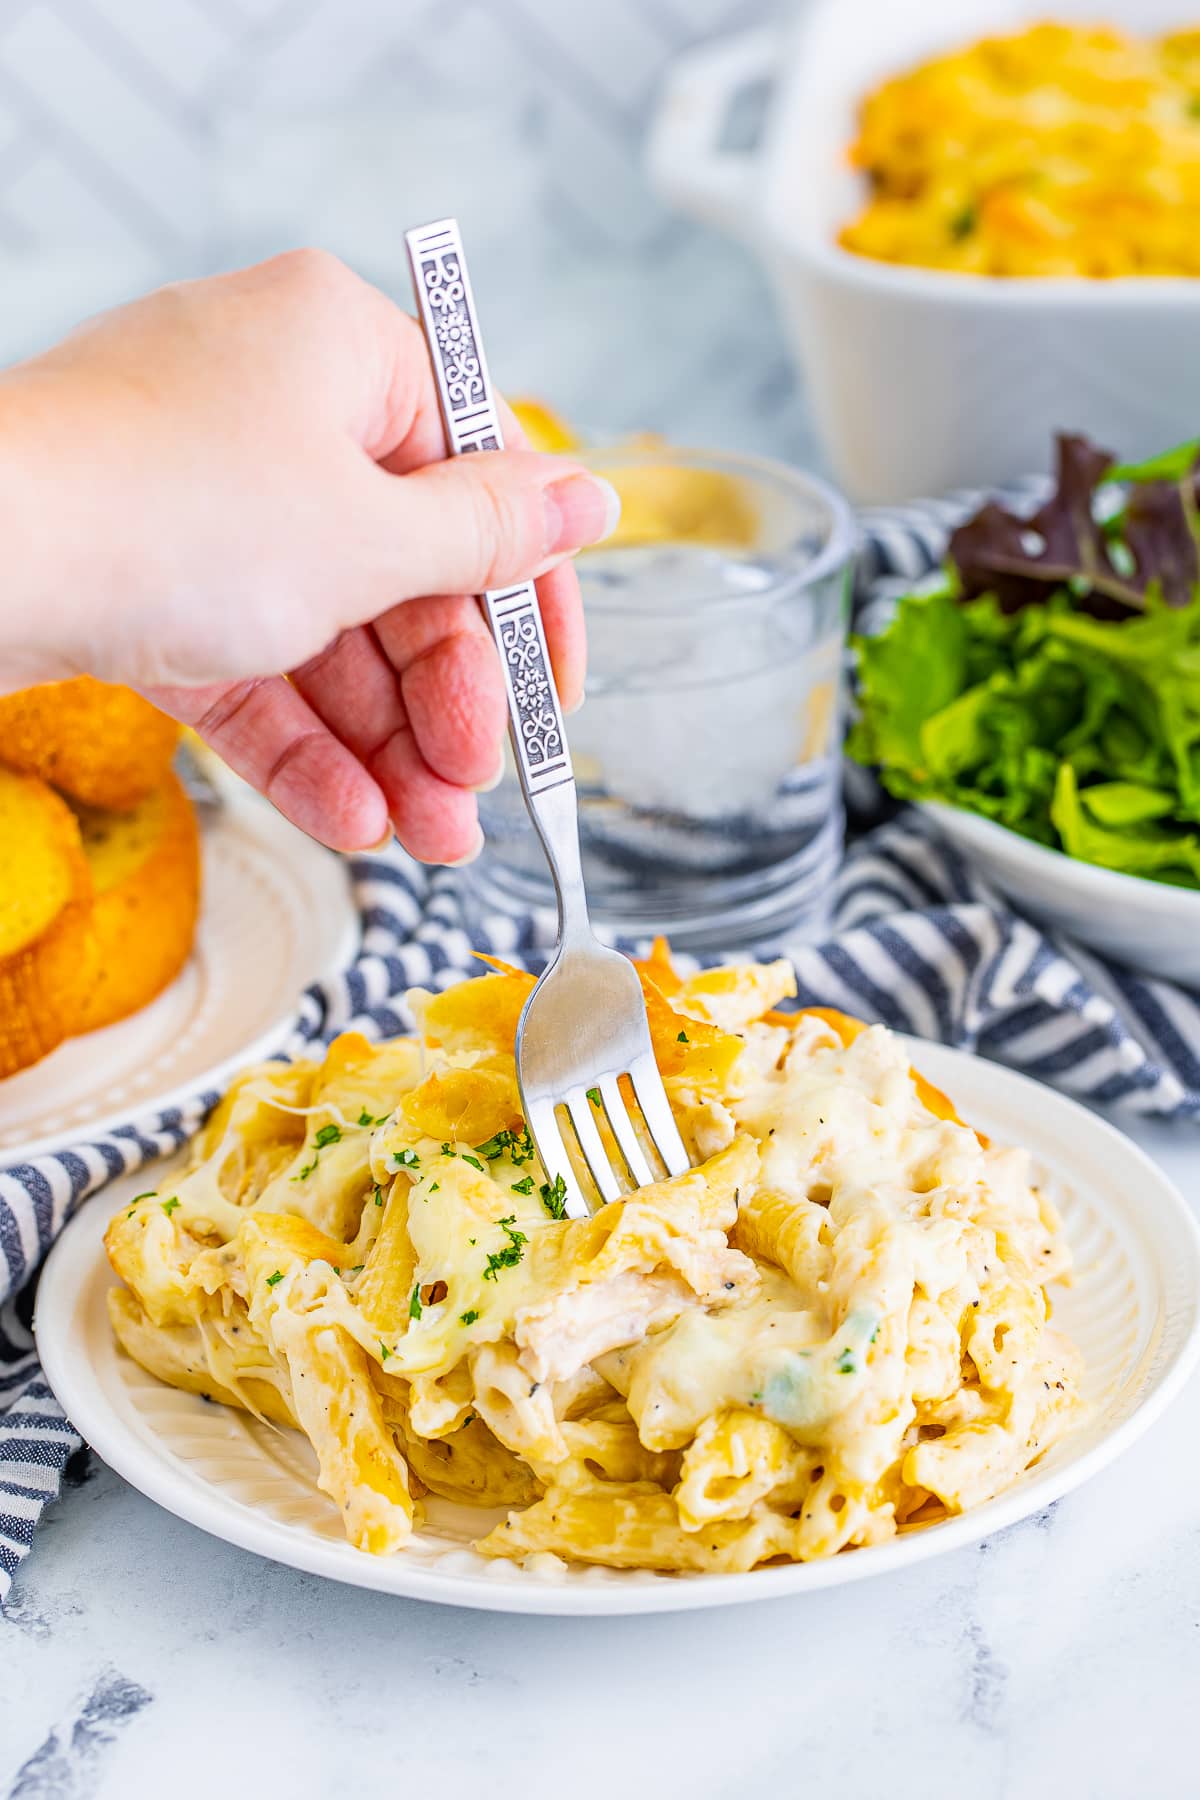 A silver patterned fork in hand grabbing some of Chicken Alfredo Bake on a plate with glass of water, bowl of salad, and navy striped linen in the background.